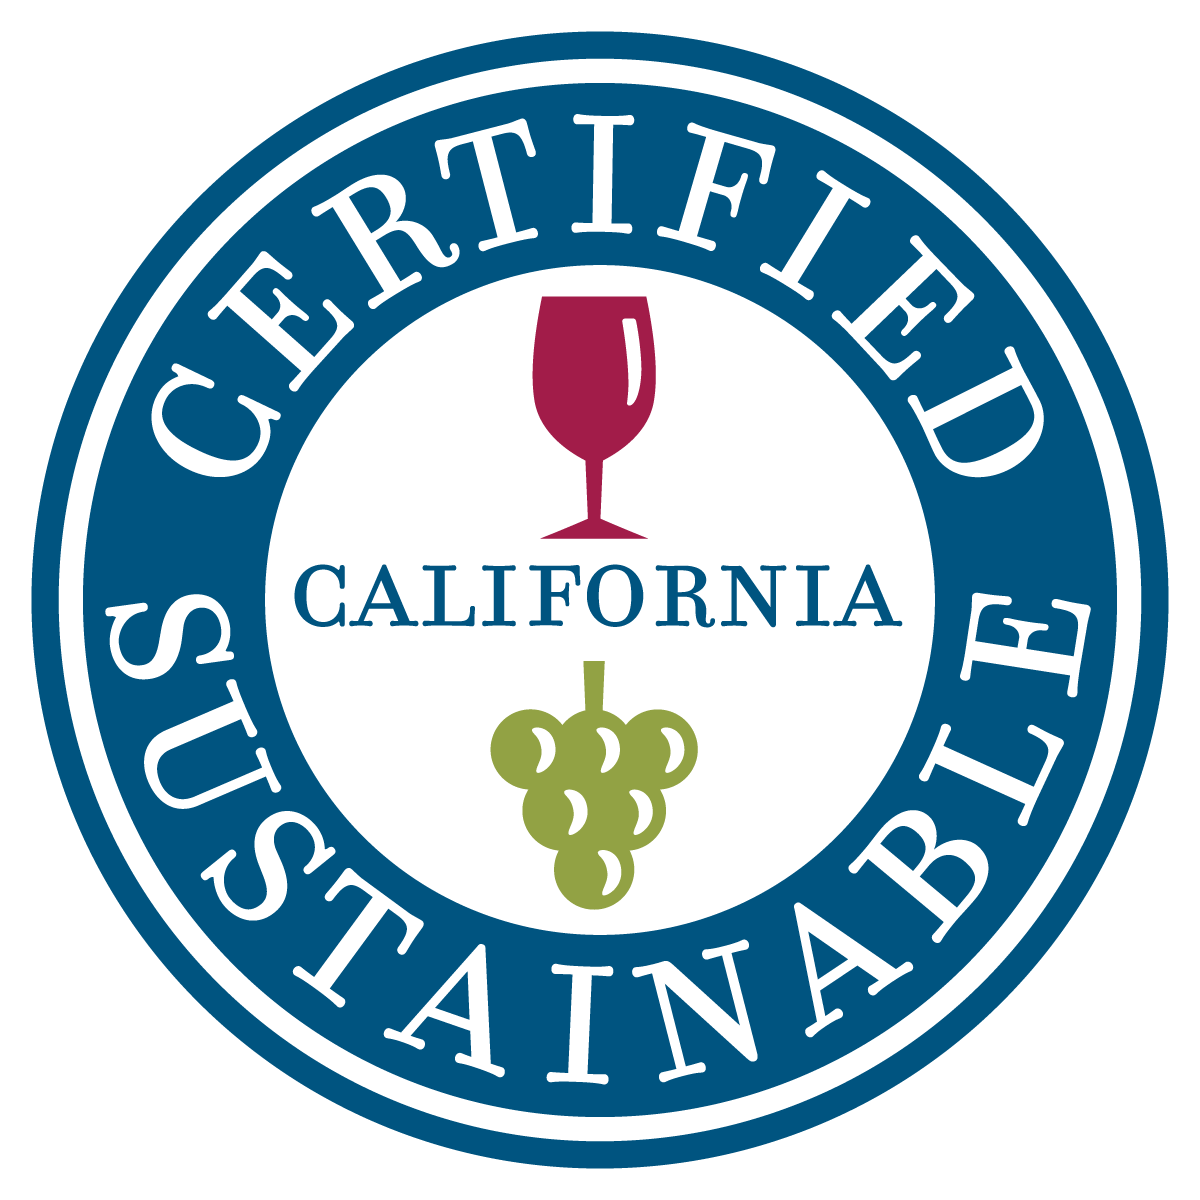 🍷 Join us Aprill 11th at 6PM to taste Certified Sustainable wines with winemaker Steve Driscoll on the big screen.  From grapes to glass, sustainability matters. Call us or RSVP at bit.ly/3lF6Qiq
#wineryspotlight #winetasting #agriculture #sustainability #@ClosLaChance